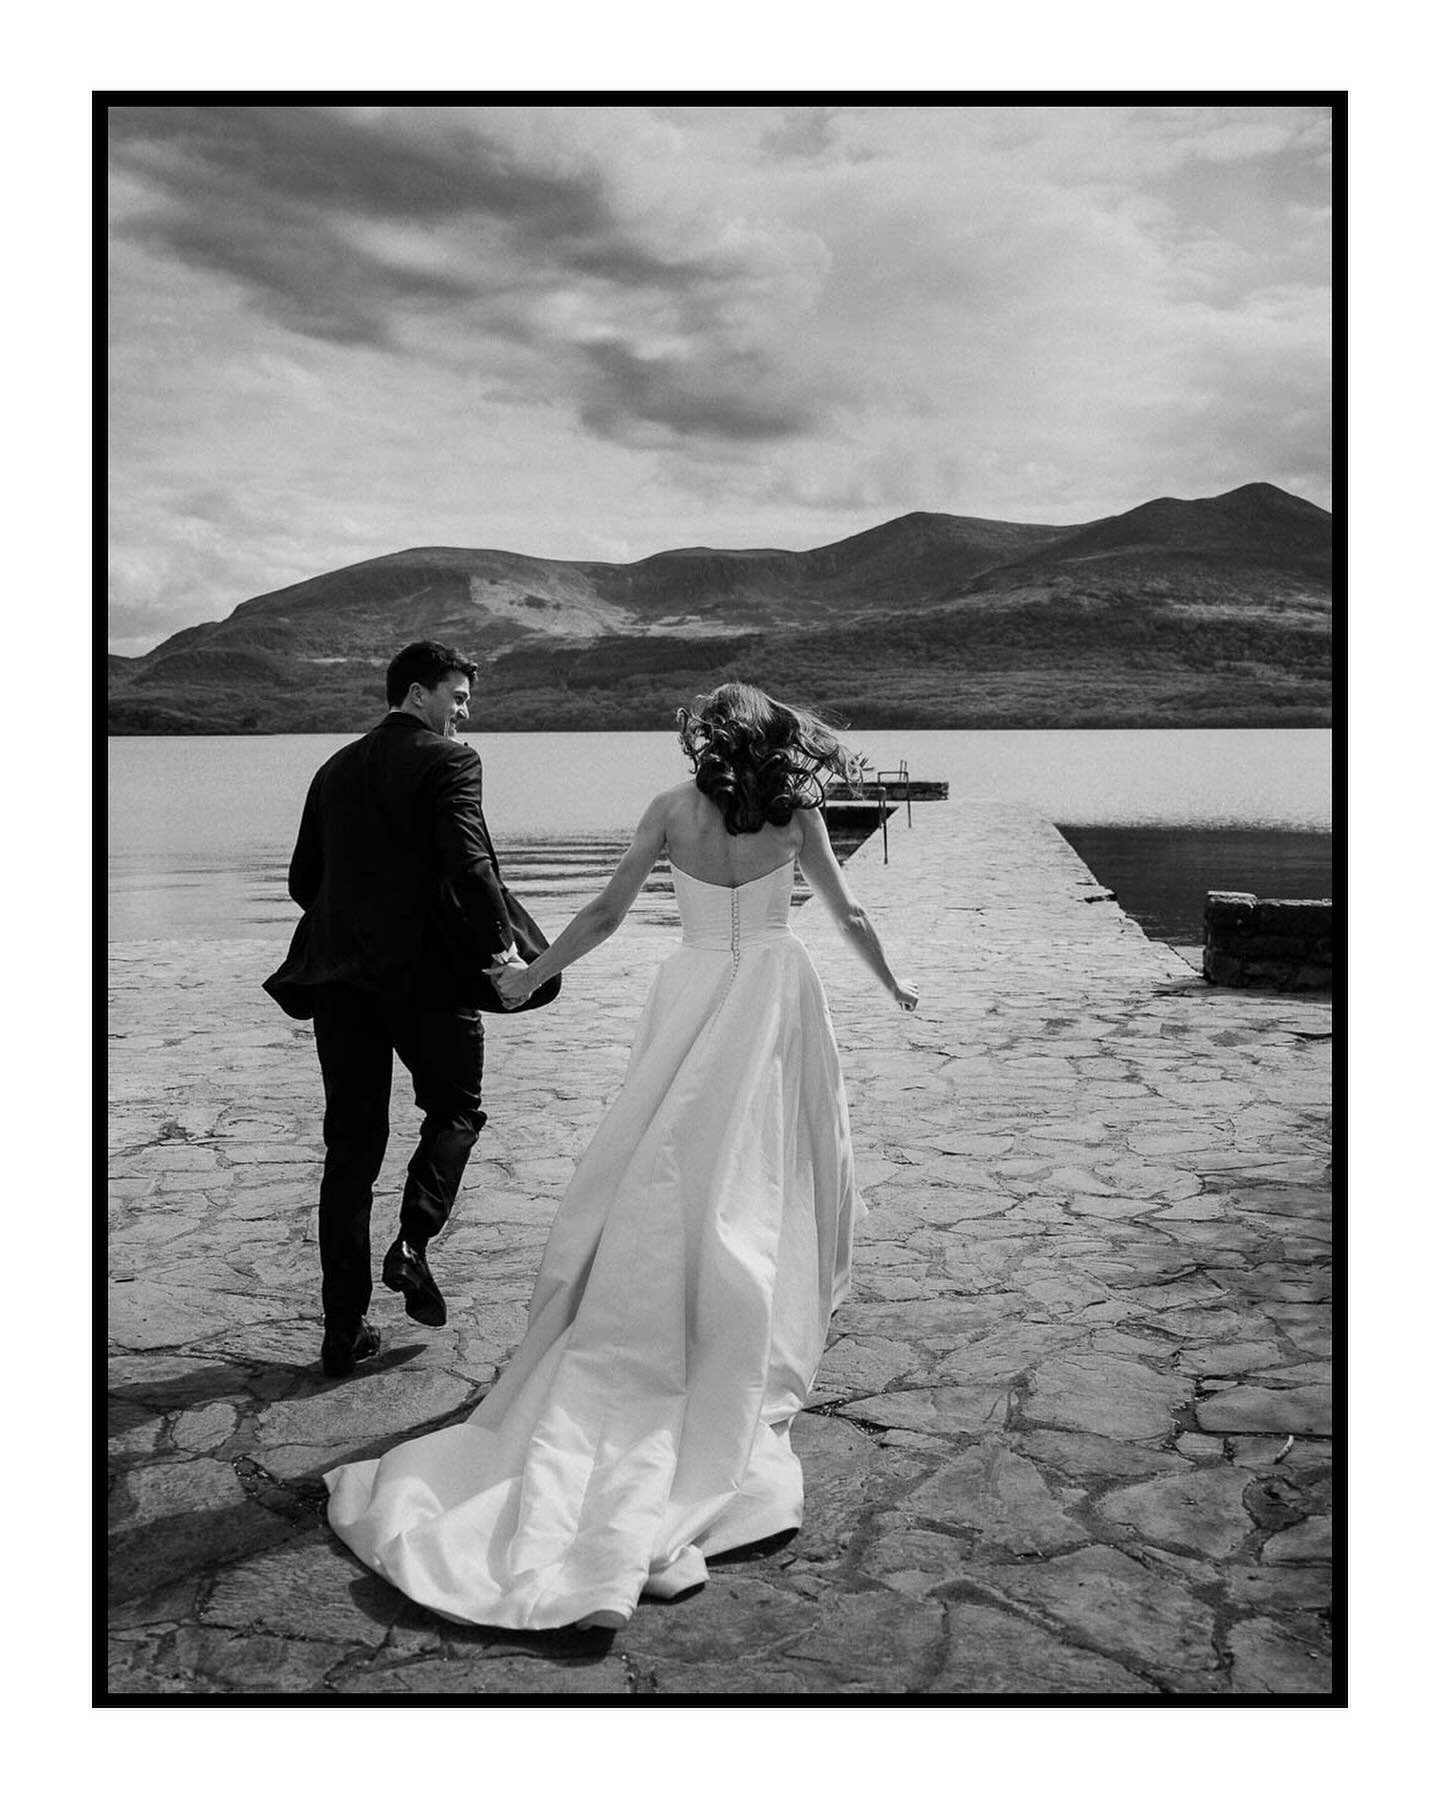 Almost impossible to choose just 10 frames from Niamh and David&rsquo;s spectacular wedding in Killarney on Friday. I still haven&rsquo;t come down from the adrenaline rush. 

A stunning couple, who embraced the wedding rollercoaster with lightness a